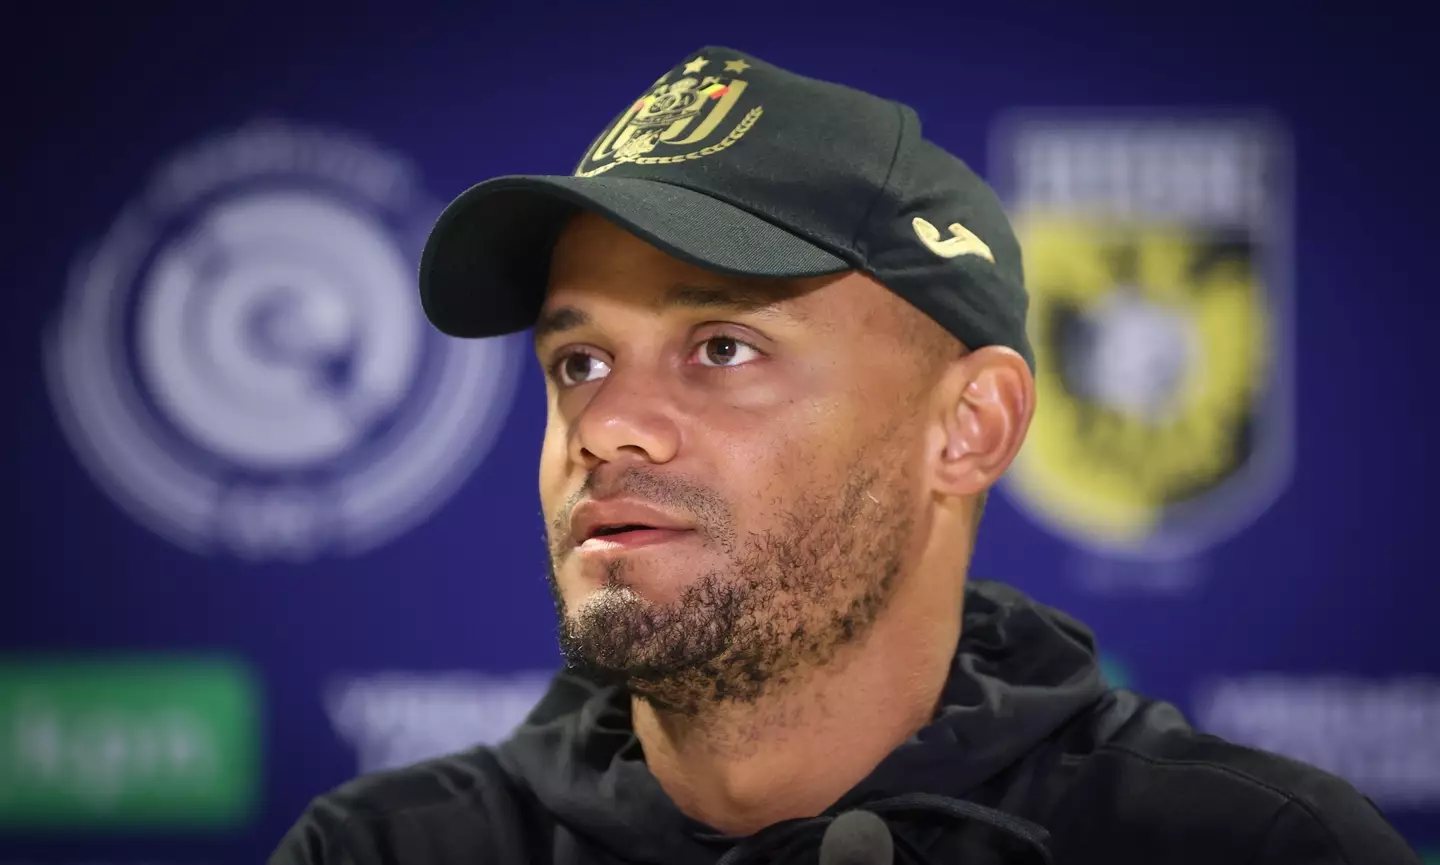 Kompany has been in charge of Anderlecht for the last 18 months (Image: PA)